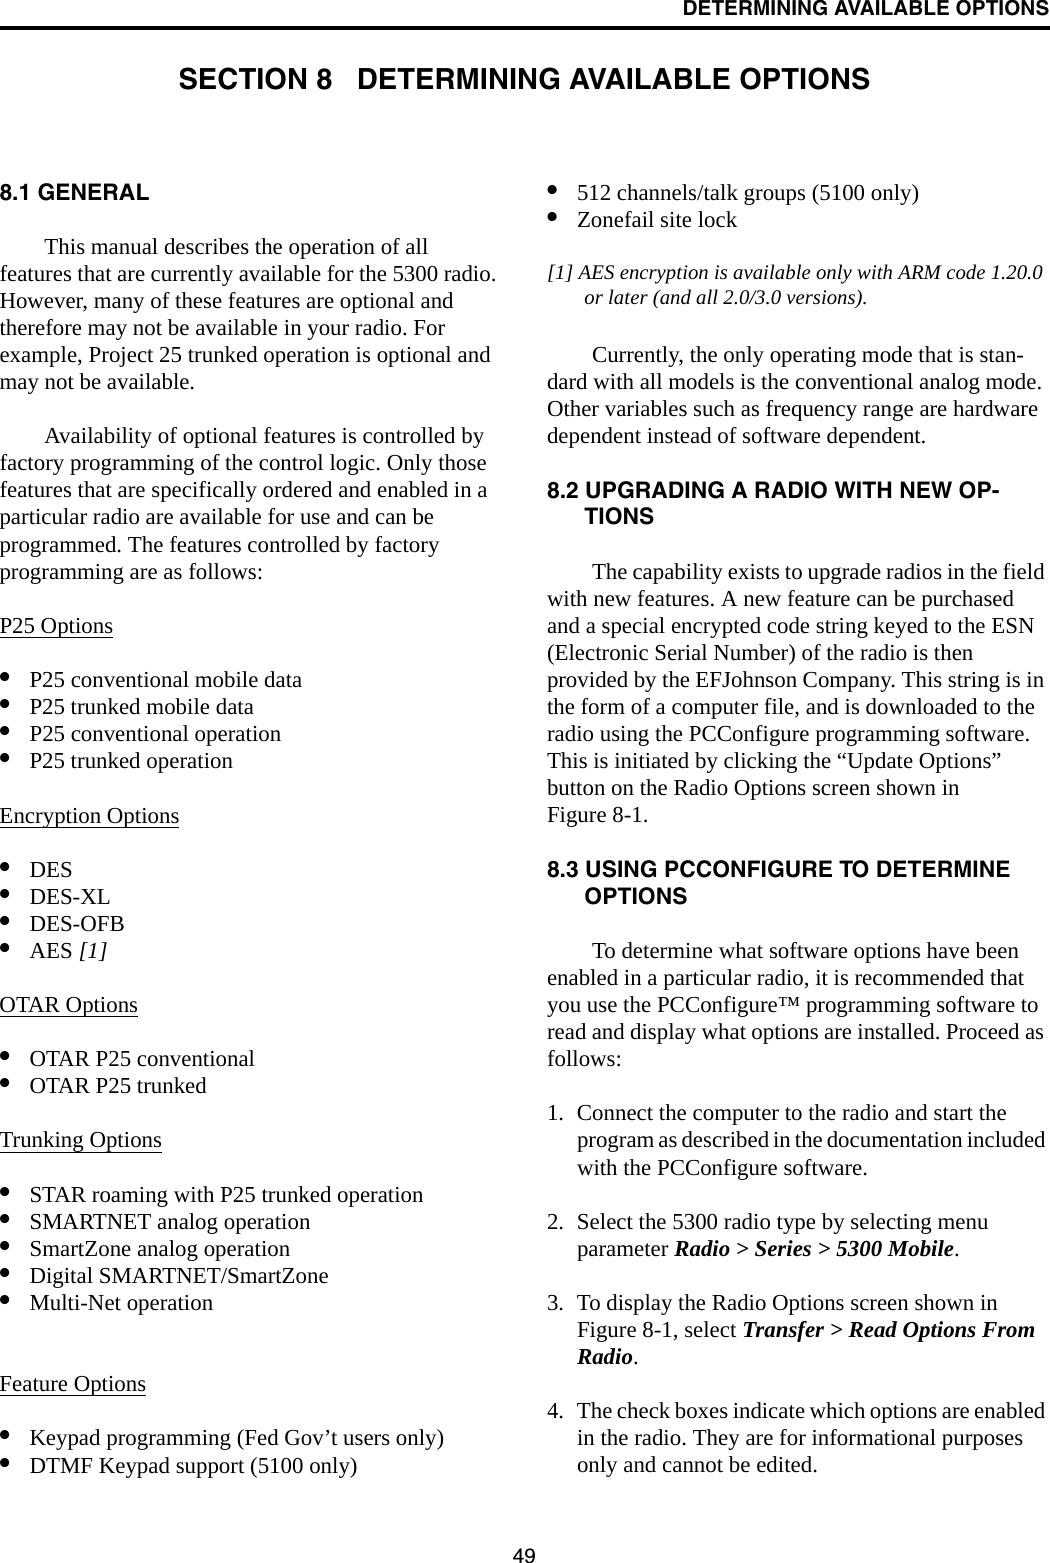 49DETERMINING AVAILABLE OPTIONSSECTION 8   DETERMINING AVAILABLE OPTIONS8.1 GENERALThis manual describes the operation of all features that are currently available for the 5300 radio. However, many of these features are optional and therefore may not be available in your radio. For example, Project 25 trunked operation is optional and may not be available.Availability of optional features is controlled by factory programming of the control logic. Only those features that are specifically ordered and enabled in a particular radio are available for use and can be programmed. The features controlled by factory programming are as follows:P25 Options•P25 conventional mobile data•P25 trunked mobile data•P25 conventional operation•P25 trunked operationEncryption Options•DES •DES-XL •DES-OFB•AES [1]OTAR Options•OTAR P25 conventional•OTAR P25 trunkedTrunking Options•STAR roaming with P25 trunked operation•SMARTNET analog operation•SmartZone analog operation•Digital SMARTNET/SmartZone•Multi-Net operationFeature Options•Keypad programming (Fed Gov’t users only)•DTMF Keypad support (5100 only)•512 channels/talk groups (5100 only)•Zonefail site lock[1] AES encryption is available only with ARM code 1.20.0 or later (and all 2.0/3.0 versions). Currently, the only operating mode that is stan-dard with all models is the conventional analog mode. Other variables such as frequency range are hardware dependent instead of software dependent.8.2 UPGRADING A RADIO WITH NEW OP-TIONSThe capability exists to upgrade radios in the field with new features. A new feature can be purchased and a special encrypted code string keyed to the ESN (Electronic Serial Number) of the radio is then provided by the EFJohnson Company. This string is in the form of a computer file, and is downloaded to the radio using the PCConfigure programming software. This is initiated by clicking the “Update Options” button on the Radio Options screen shown in Figure 8-1.8.3 USING PCCONFIGURE TO DETERMINE OPTIONSTo determine what software options have been enabled in a particular radio, it is recommended that you use the PCConfigure™ programming software to read and display what options are installed. Proceed as follows:1. Connect the computer to the radio and start the program as described in the documentation included with the PCConfigure software.2. Select the 5300 radio type by selecting menu parameter Radio &gt; Series &gt; 5300 Mobile.3. To display the Radio Options screen shown in Figure 8-1, select Transfer &gt; Read Options From Radio.4. The check boxes indicate which options are enabled in the radio. They are for informational purposes only and cannot be edited.